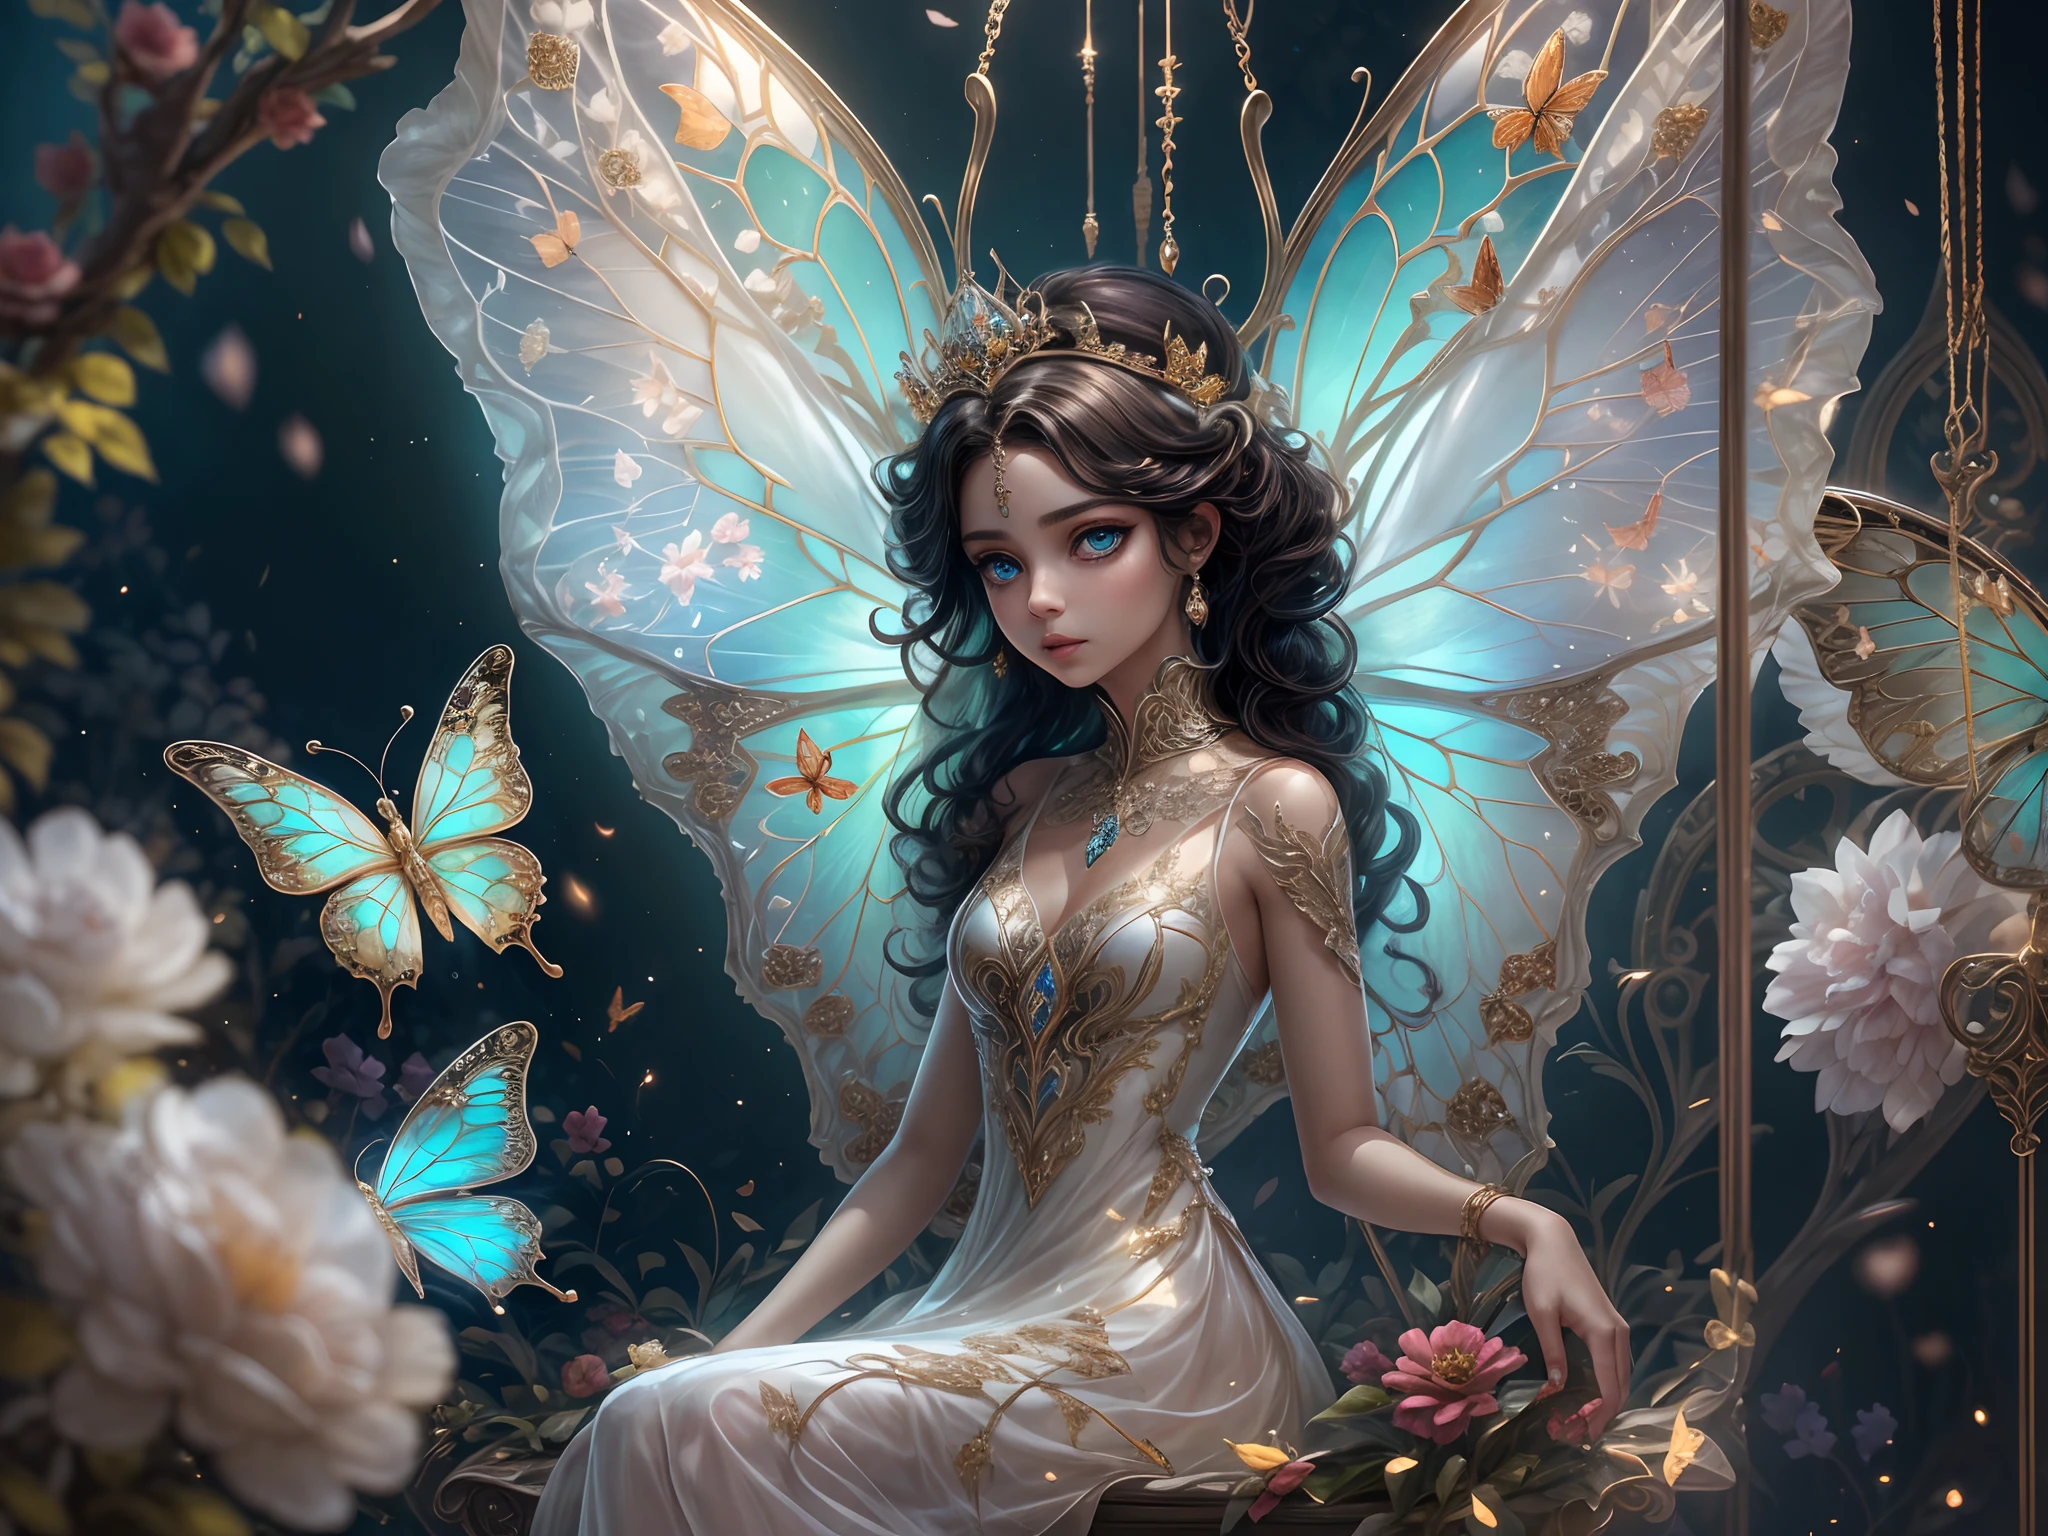 This is、It's a masterpiece of realistic fantasy with lots of sparkles, Glitter, and intricate ornate details. Produces one  woman with a beautiful delicate crown sitting on a garden swing at night. She is a beautiful and seductive butterfly queen with stunning curly black hair, (((Incredibly realistic and detailed dynamic eyes in bright colors with realistic shading))).  Her skin is translucent white, Her eyes are shining, And her dress is elegant. Her dress is spun with delicate and finest gossamer silk, Convoluted, Delicate floral details and gold silk butterfly sleeves. Her face is lovely and . Include flowers that glow in the dark, Lots of particles, Highly realistic fantasy butte fly with translucent gem-colored wings and fine details, And shine. Artwork done in the style of Guviz、Trending fantasy titles from Artstation and Midjourney、Reminds of the masters of this genre. camera: Using dynamic composition techniques、Emphasizes ethereal delicacy and delicate details.